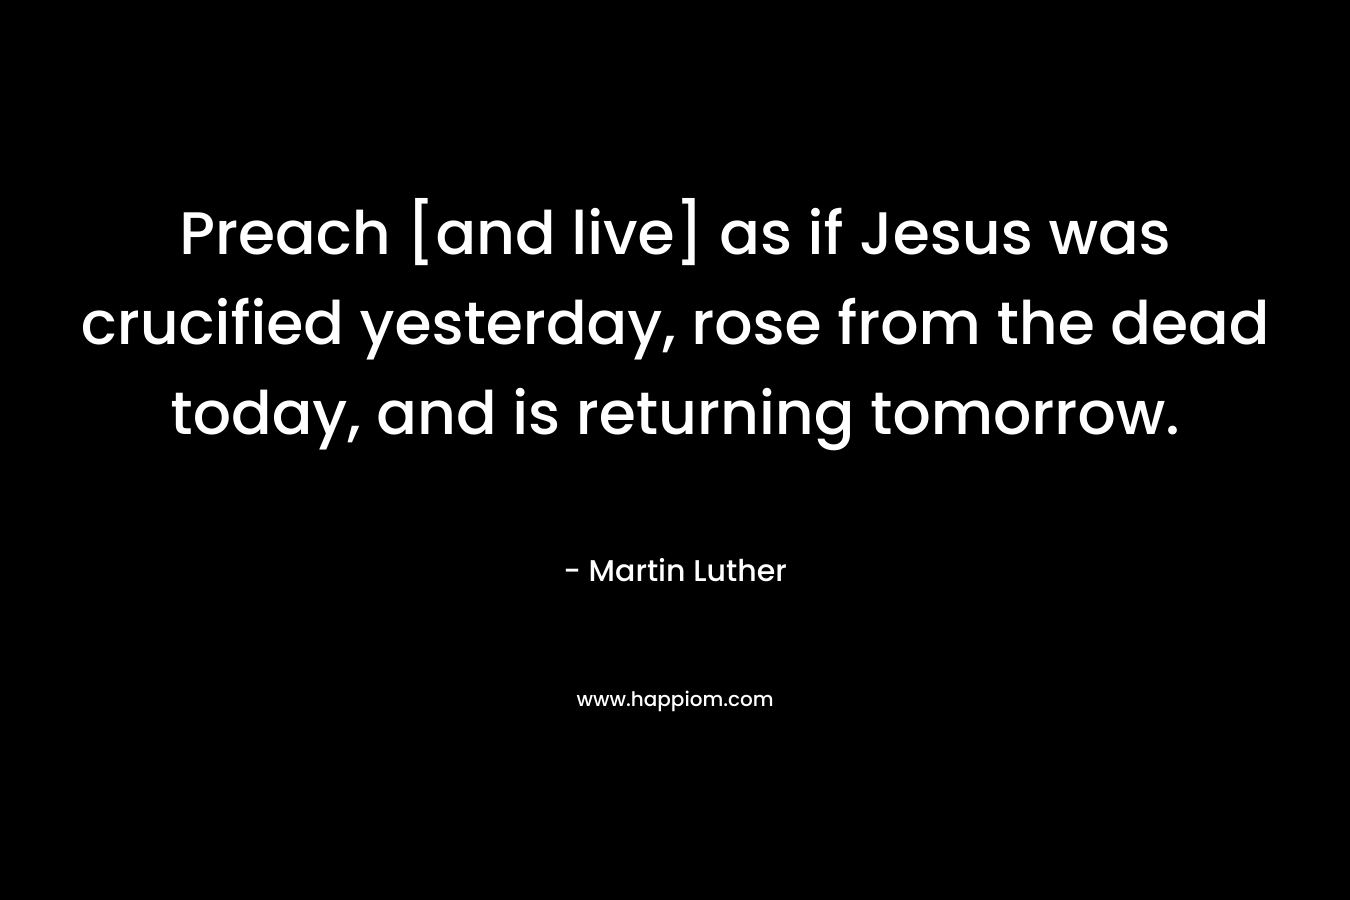 Preach [and live] as if Jesus was crucified yesterday, rose from the dead today, and is returning tomorrow.